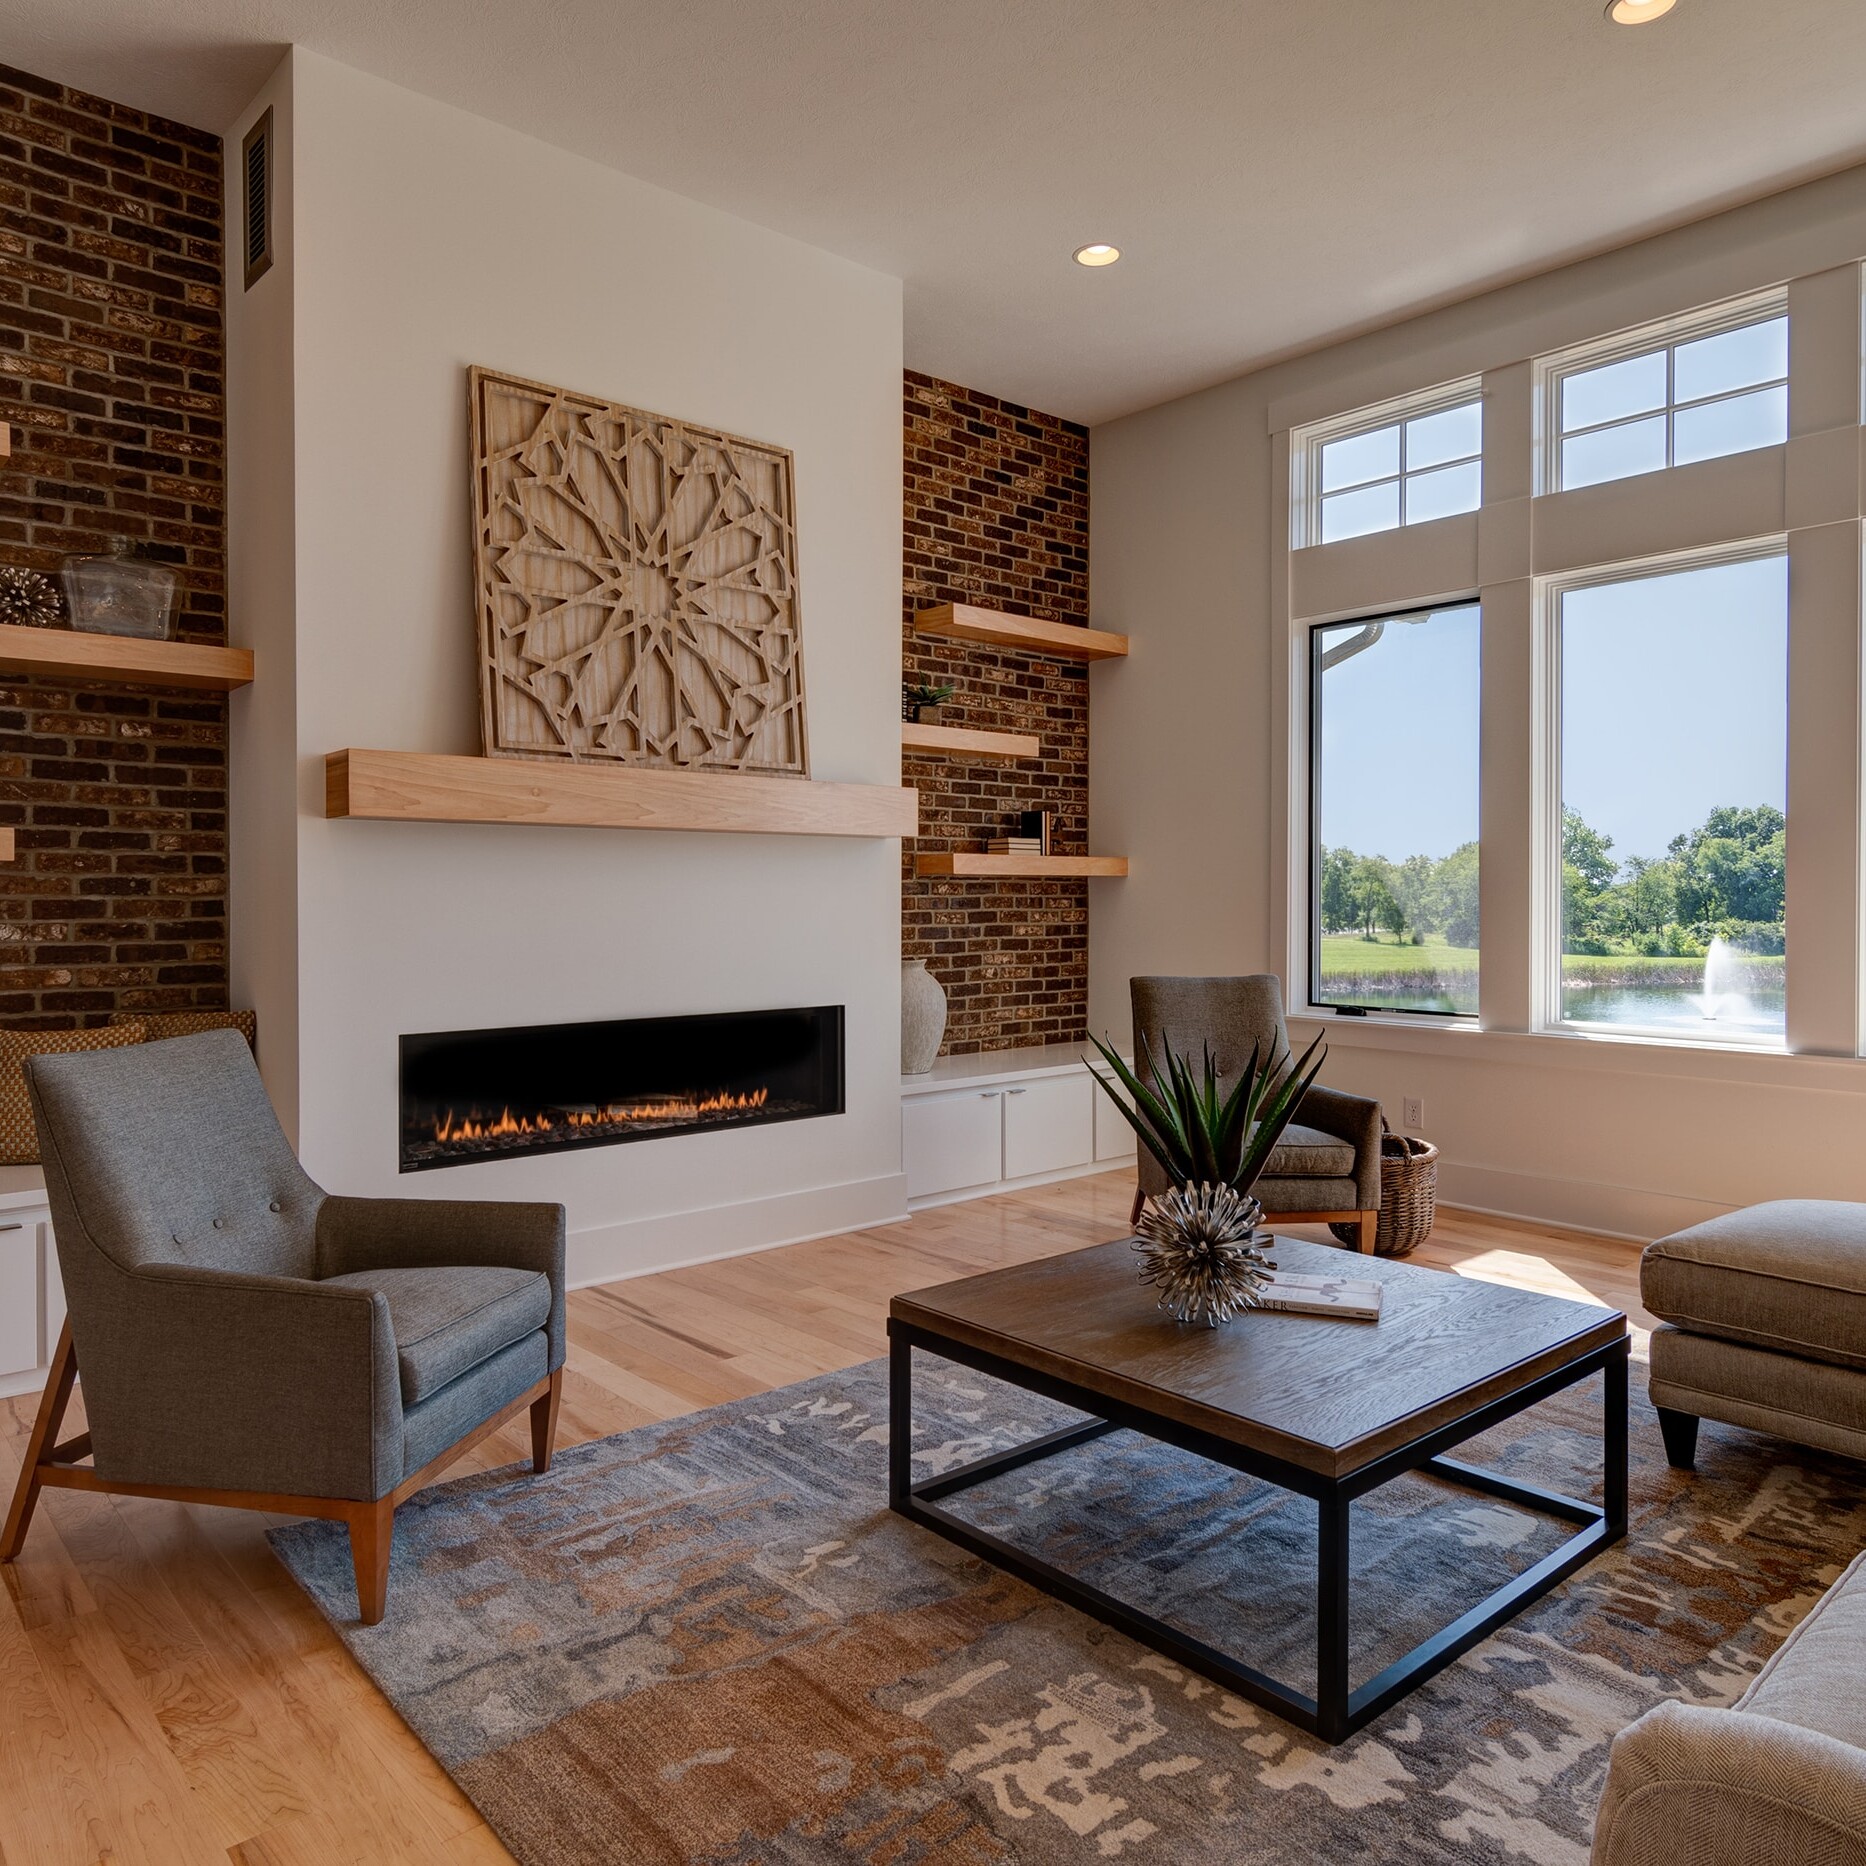 A living room with a brick fireplace and hardwood floors.